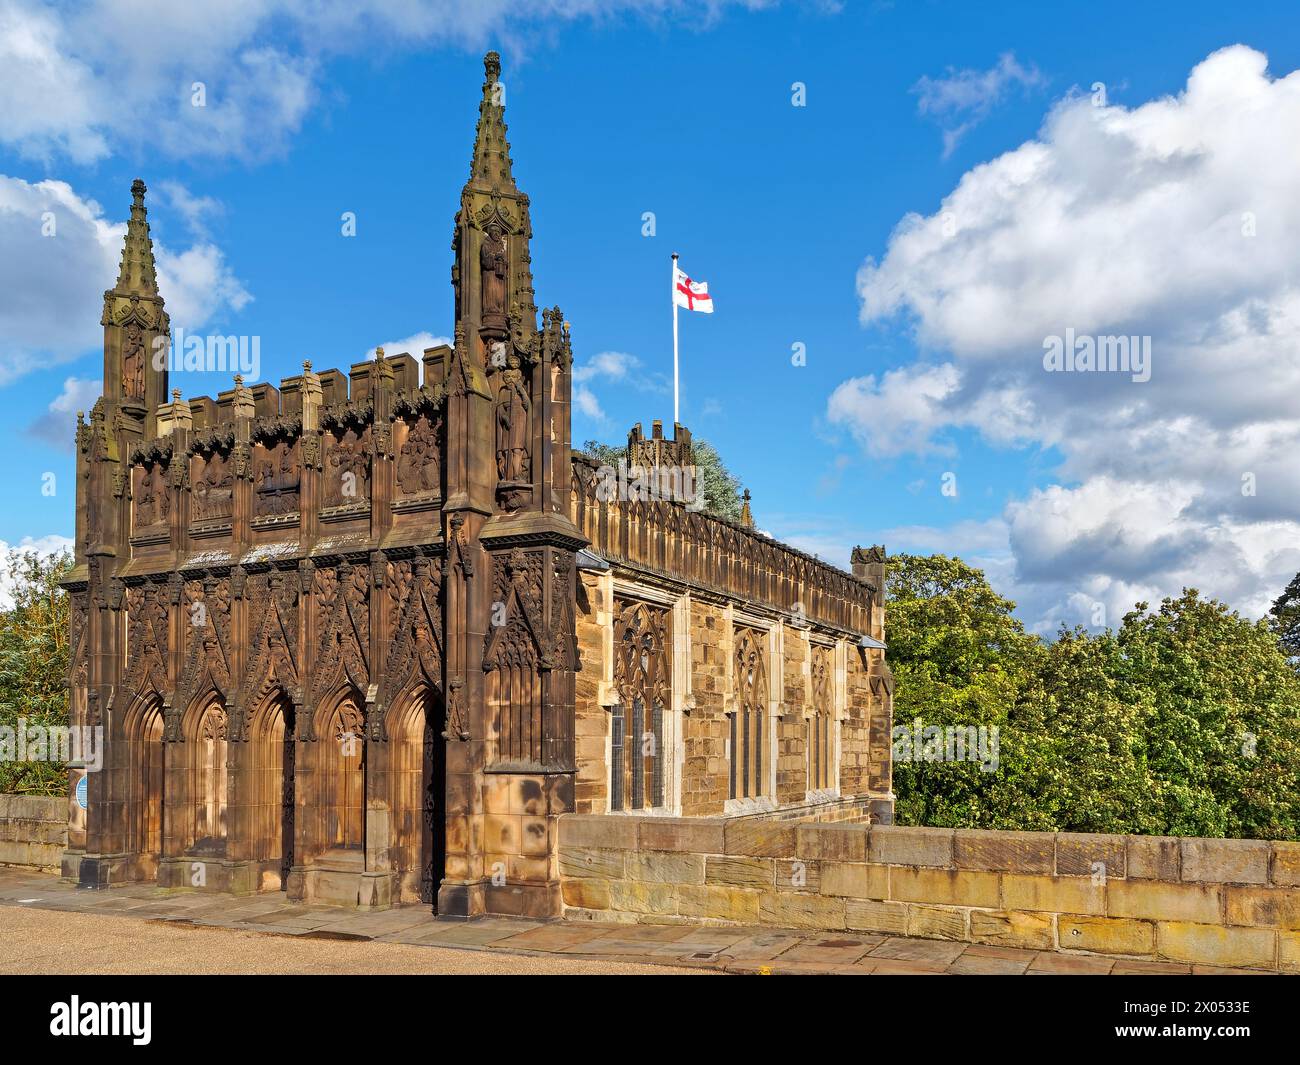 UK, West Yorkshire, Wakefield, Chantry Chapel of St Mary the Virgin & the Medieval Bridge over the River Calder. Stock Photo